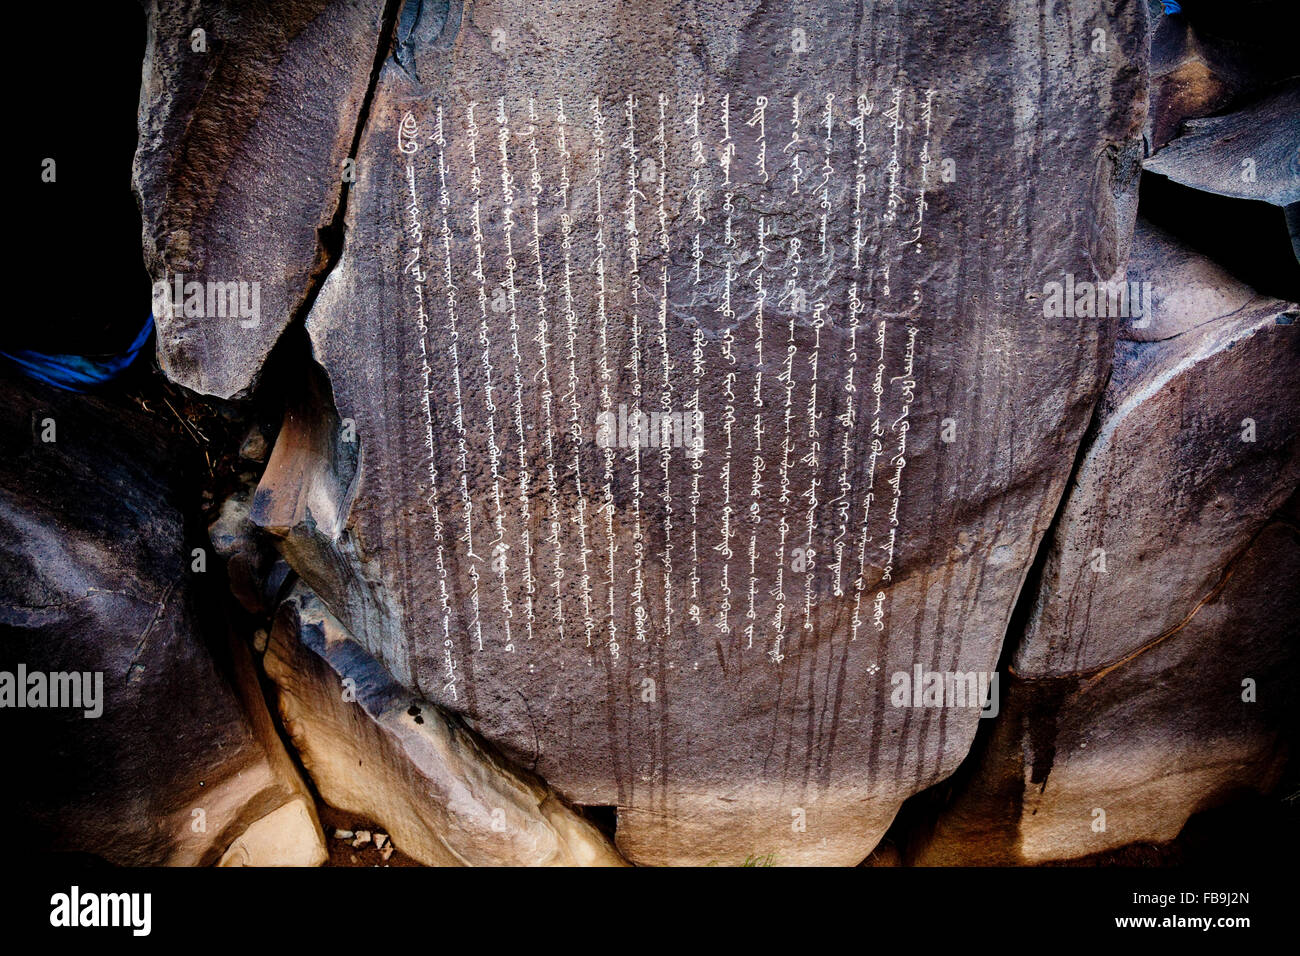 Centuries old Buddhist petroglyphs carved in Mongol script (Hudum Mongol bichig) in a remote part of the Gobi Desert, Mongolia. Stock Photo